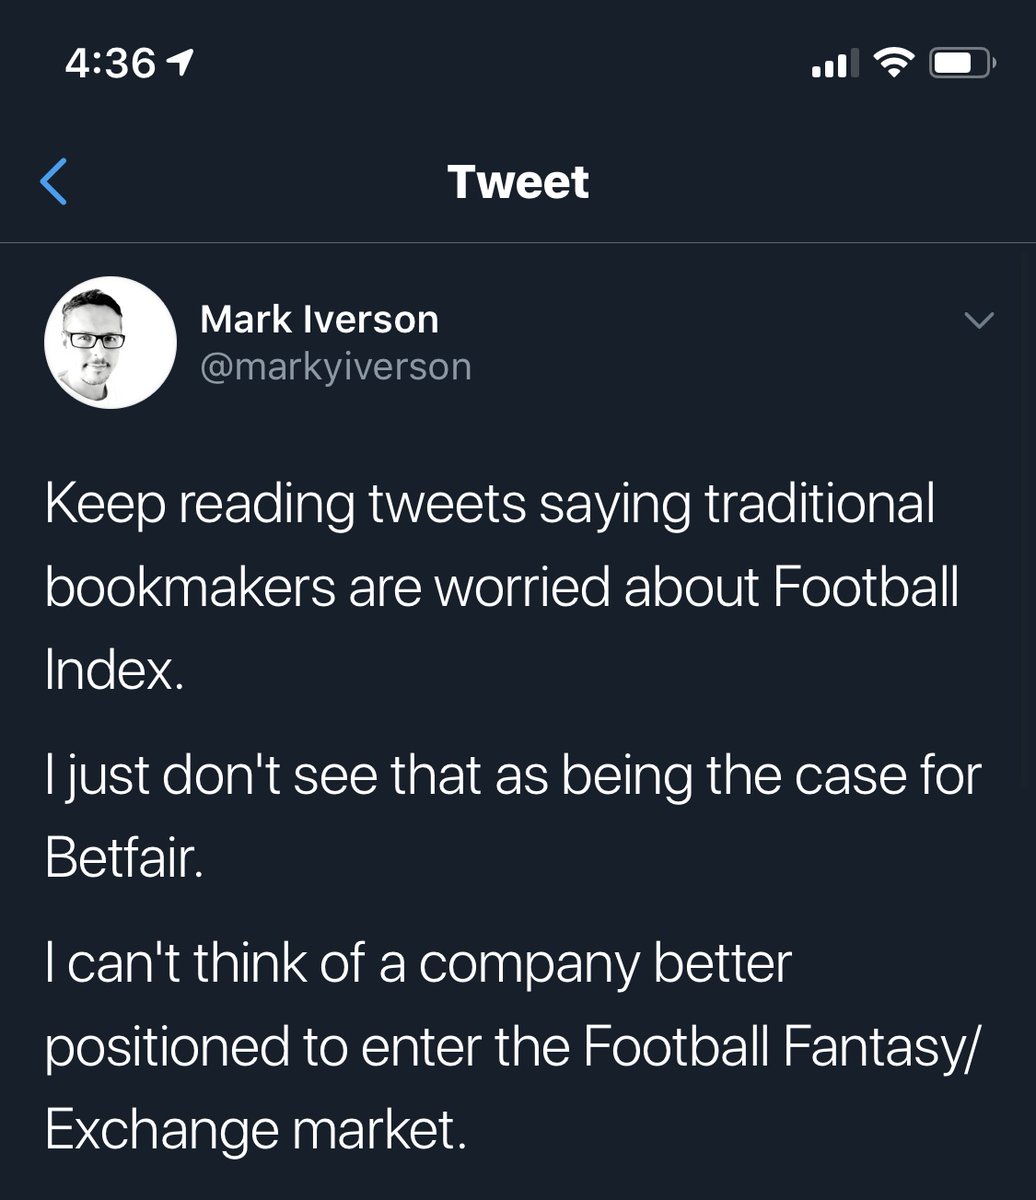 Slandering the concept and platform.. They are fully aware that collectively they lose their relevance and audience when BetFair isn't at the helm.Scared gents?In Mark Iverson's own words... (your agenda is transparent).